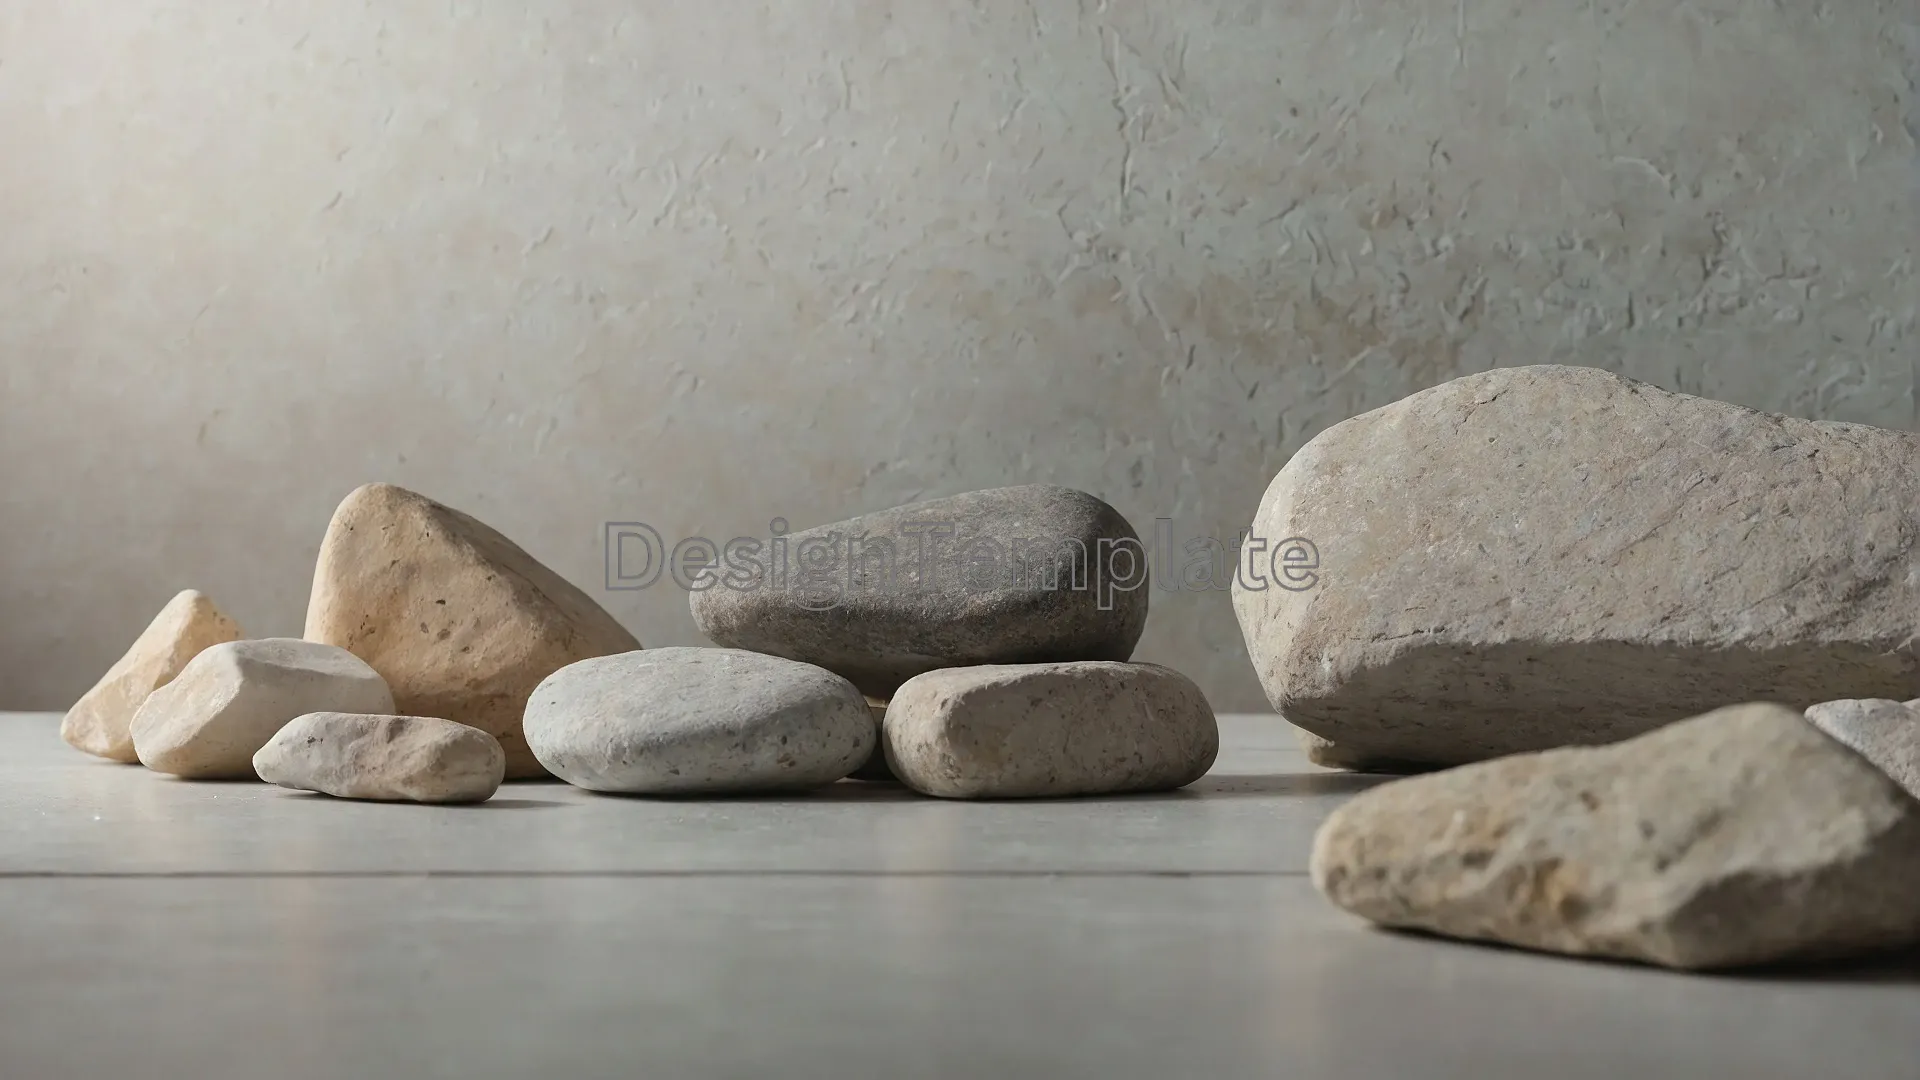 Natural Stone and Shelf Texture Background image